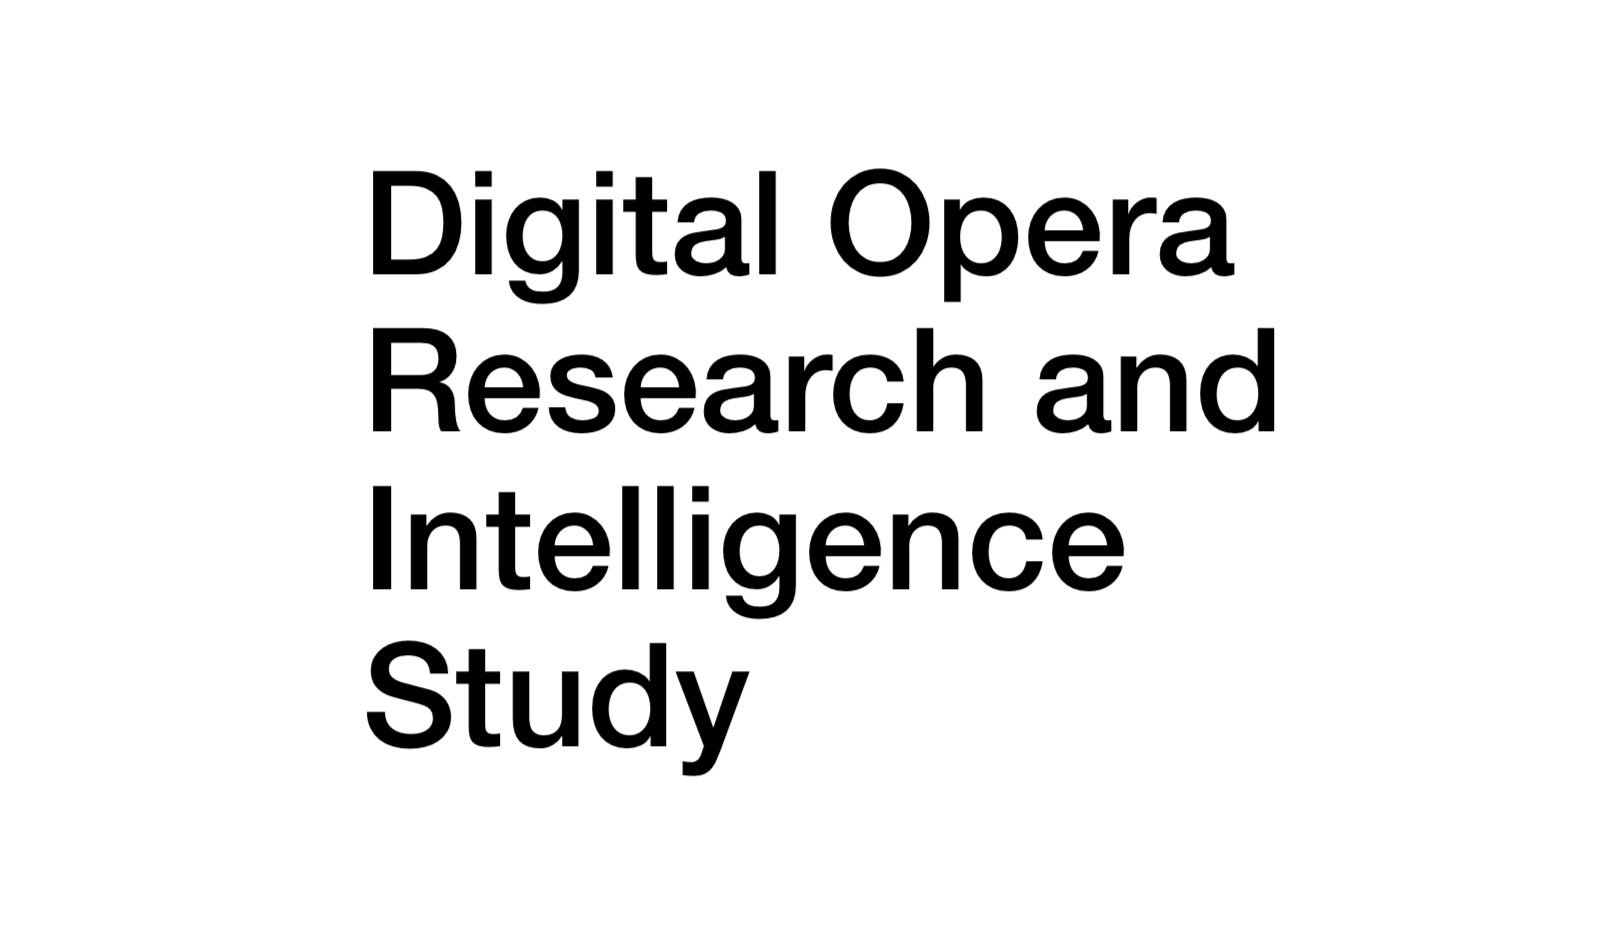 AtG DORIS: Technology is shaping the future. How will it change the future of opera?